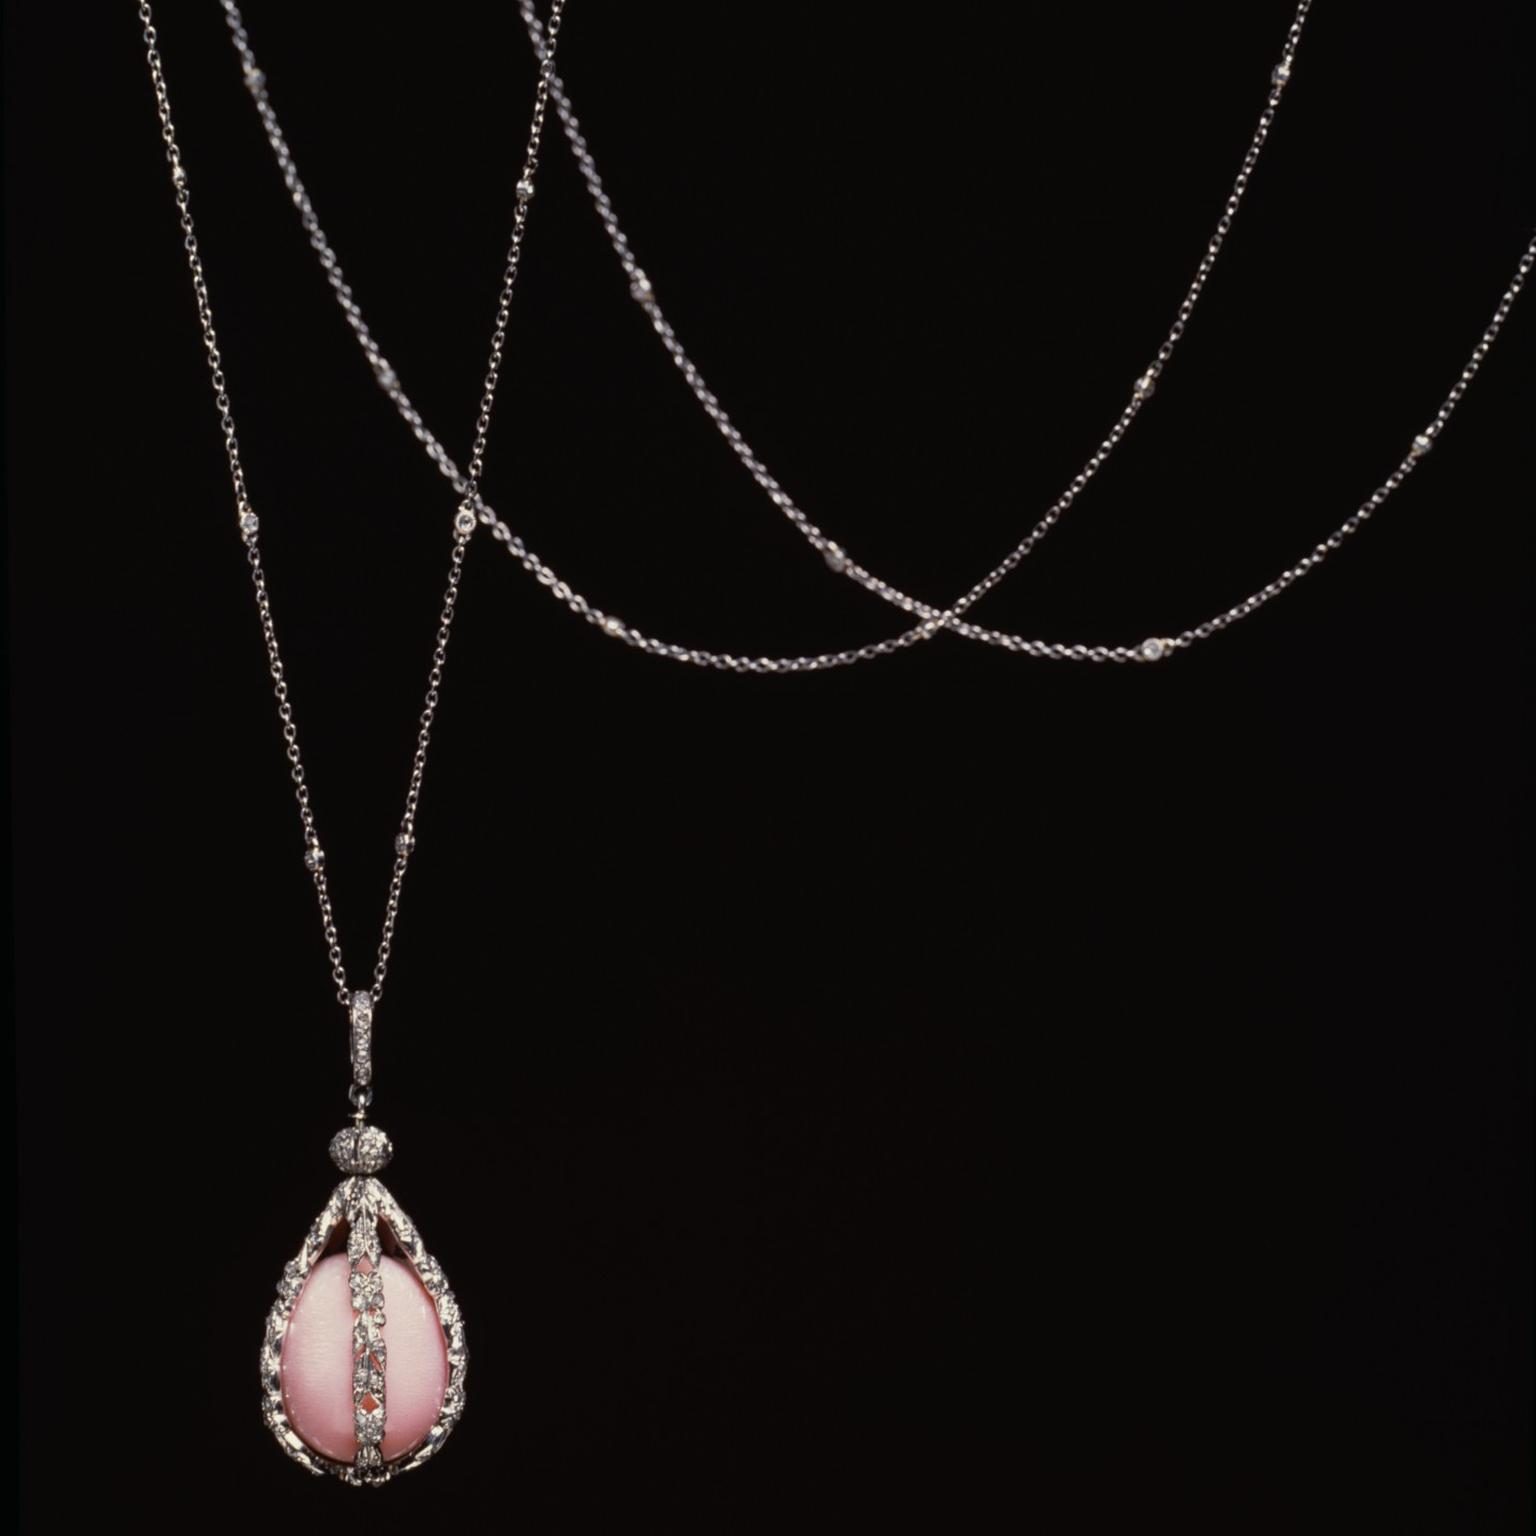 Antique Tiffany pink conch pearl pendant necklace that opens to reveal a 23.50 oval-shaped pink conch pearl